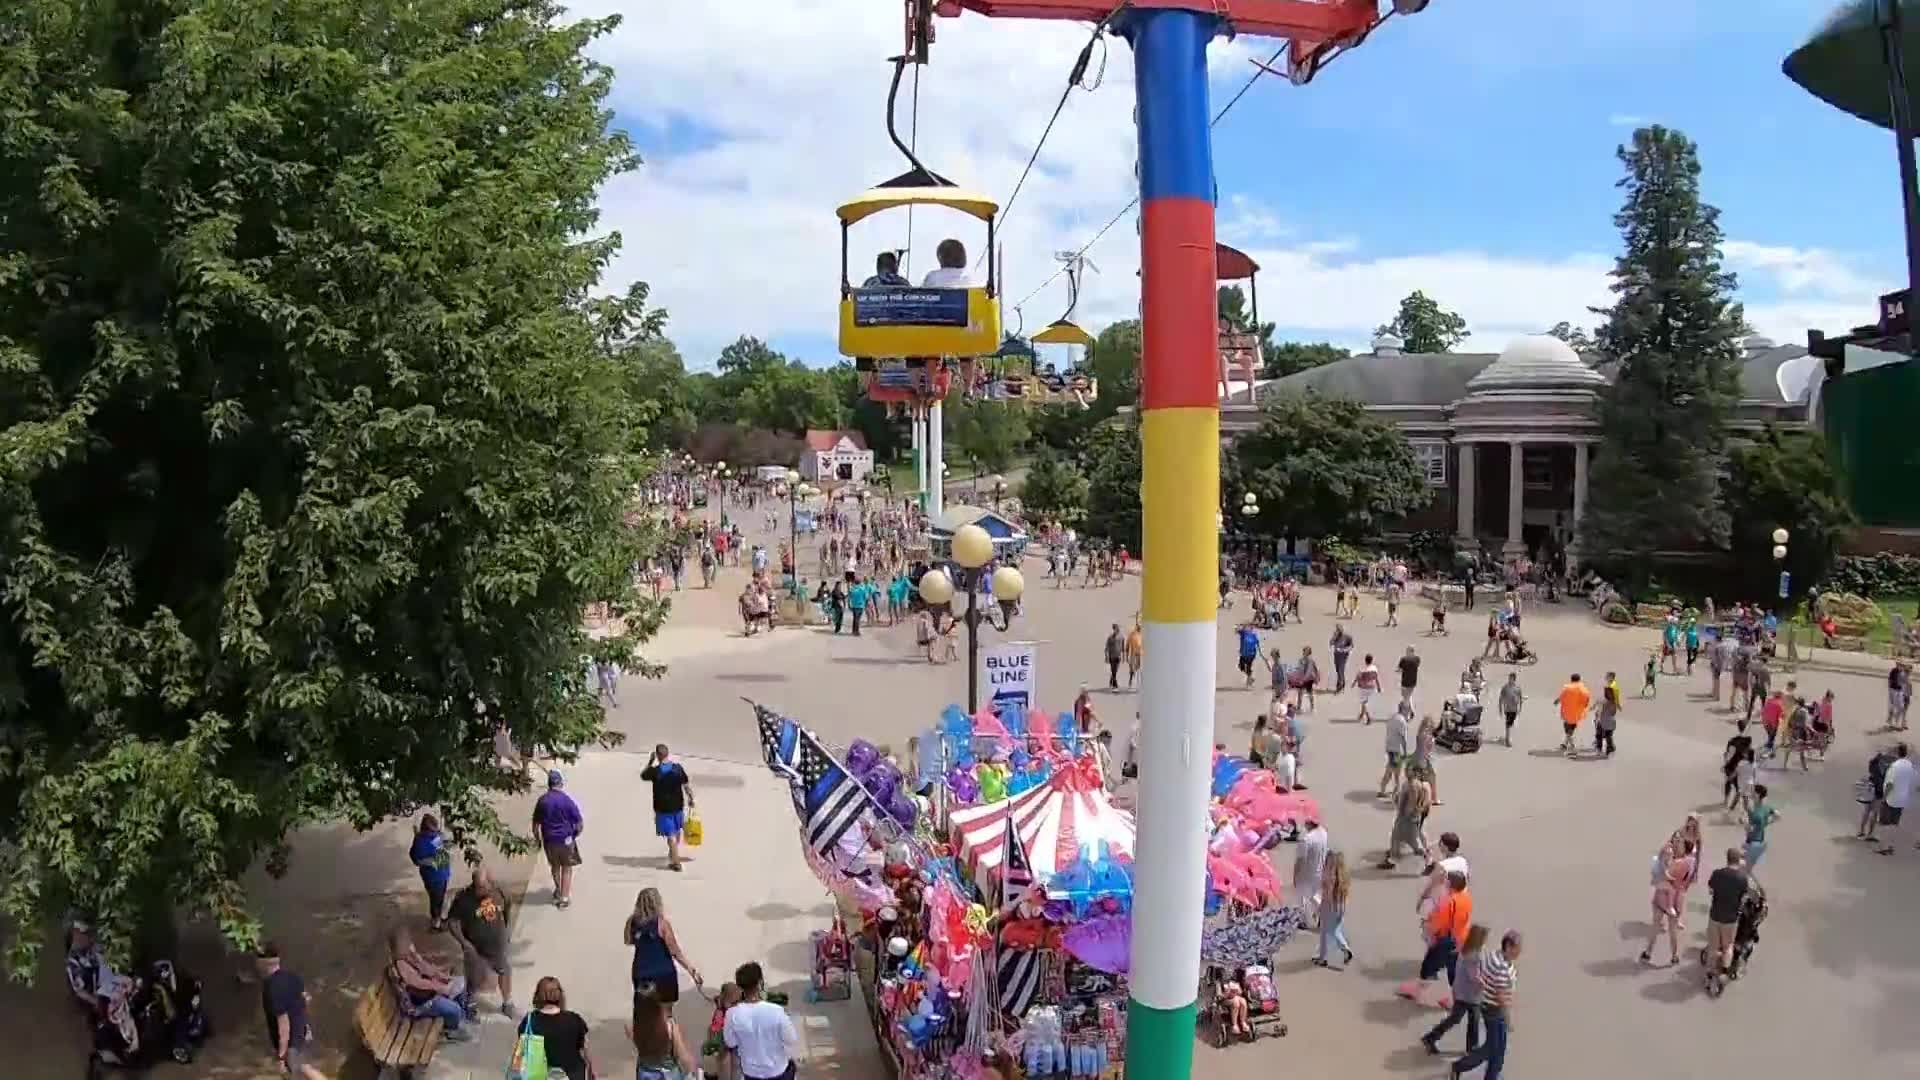 Sky Glider ride over the state fair, 2019.